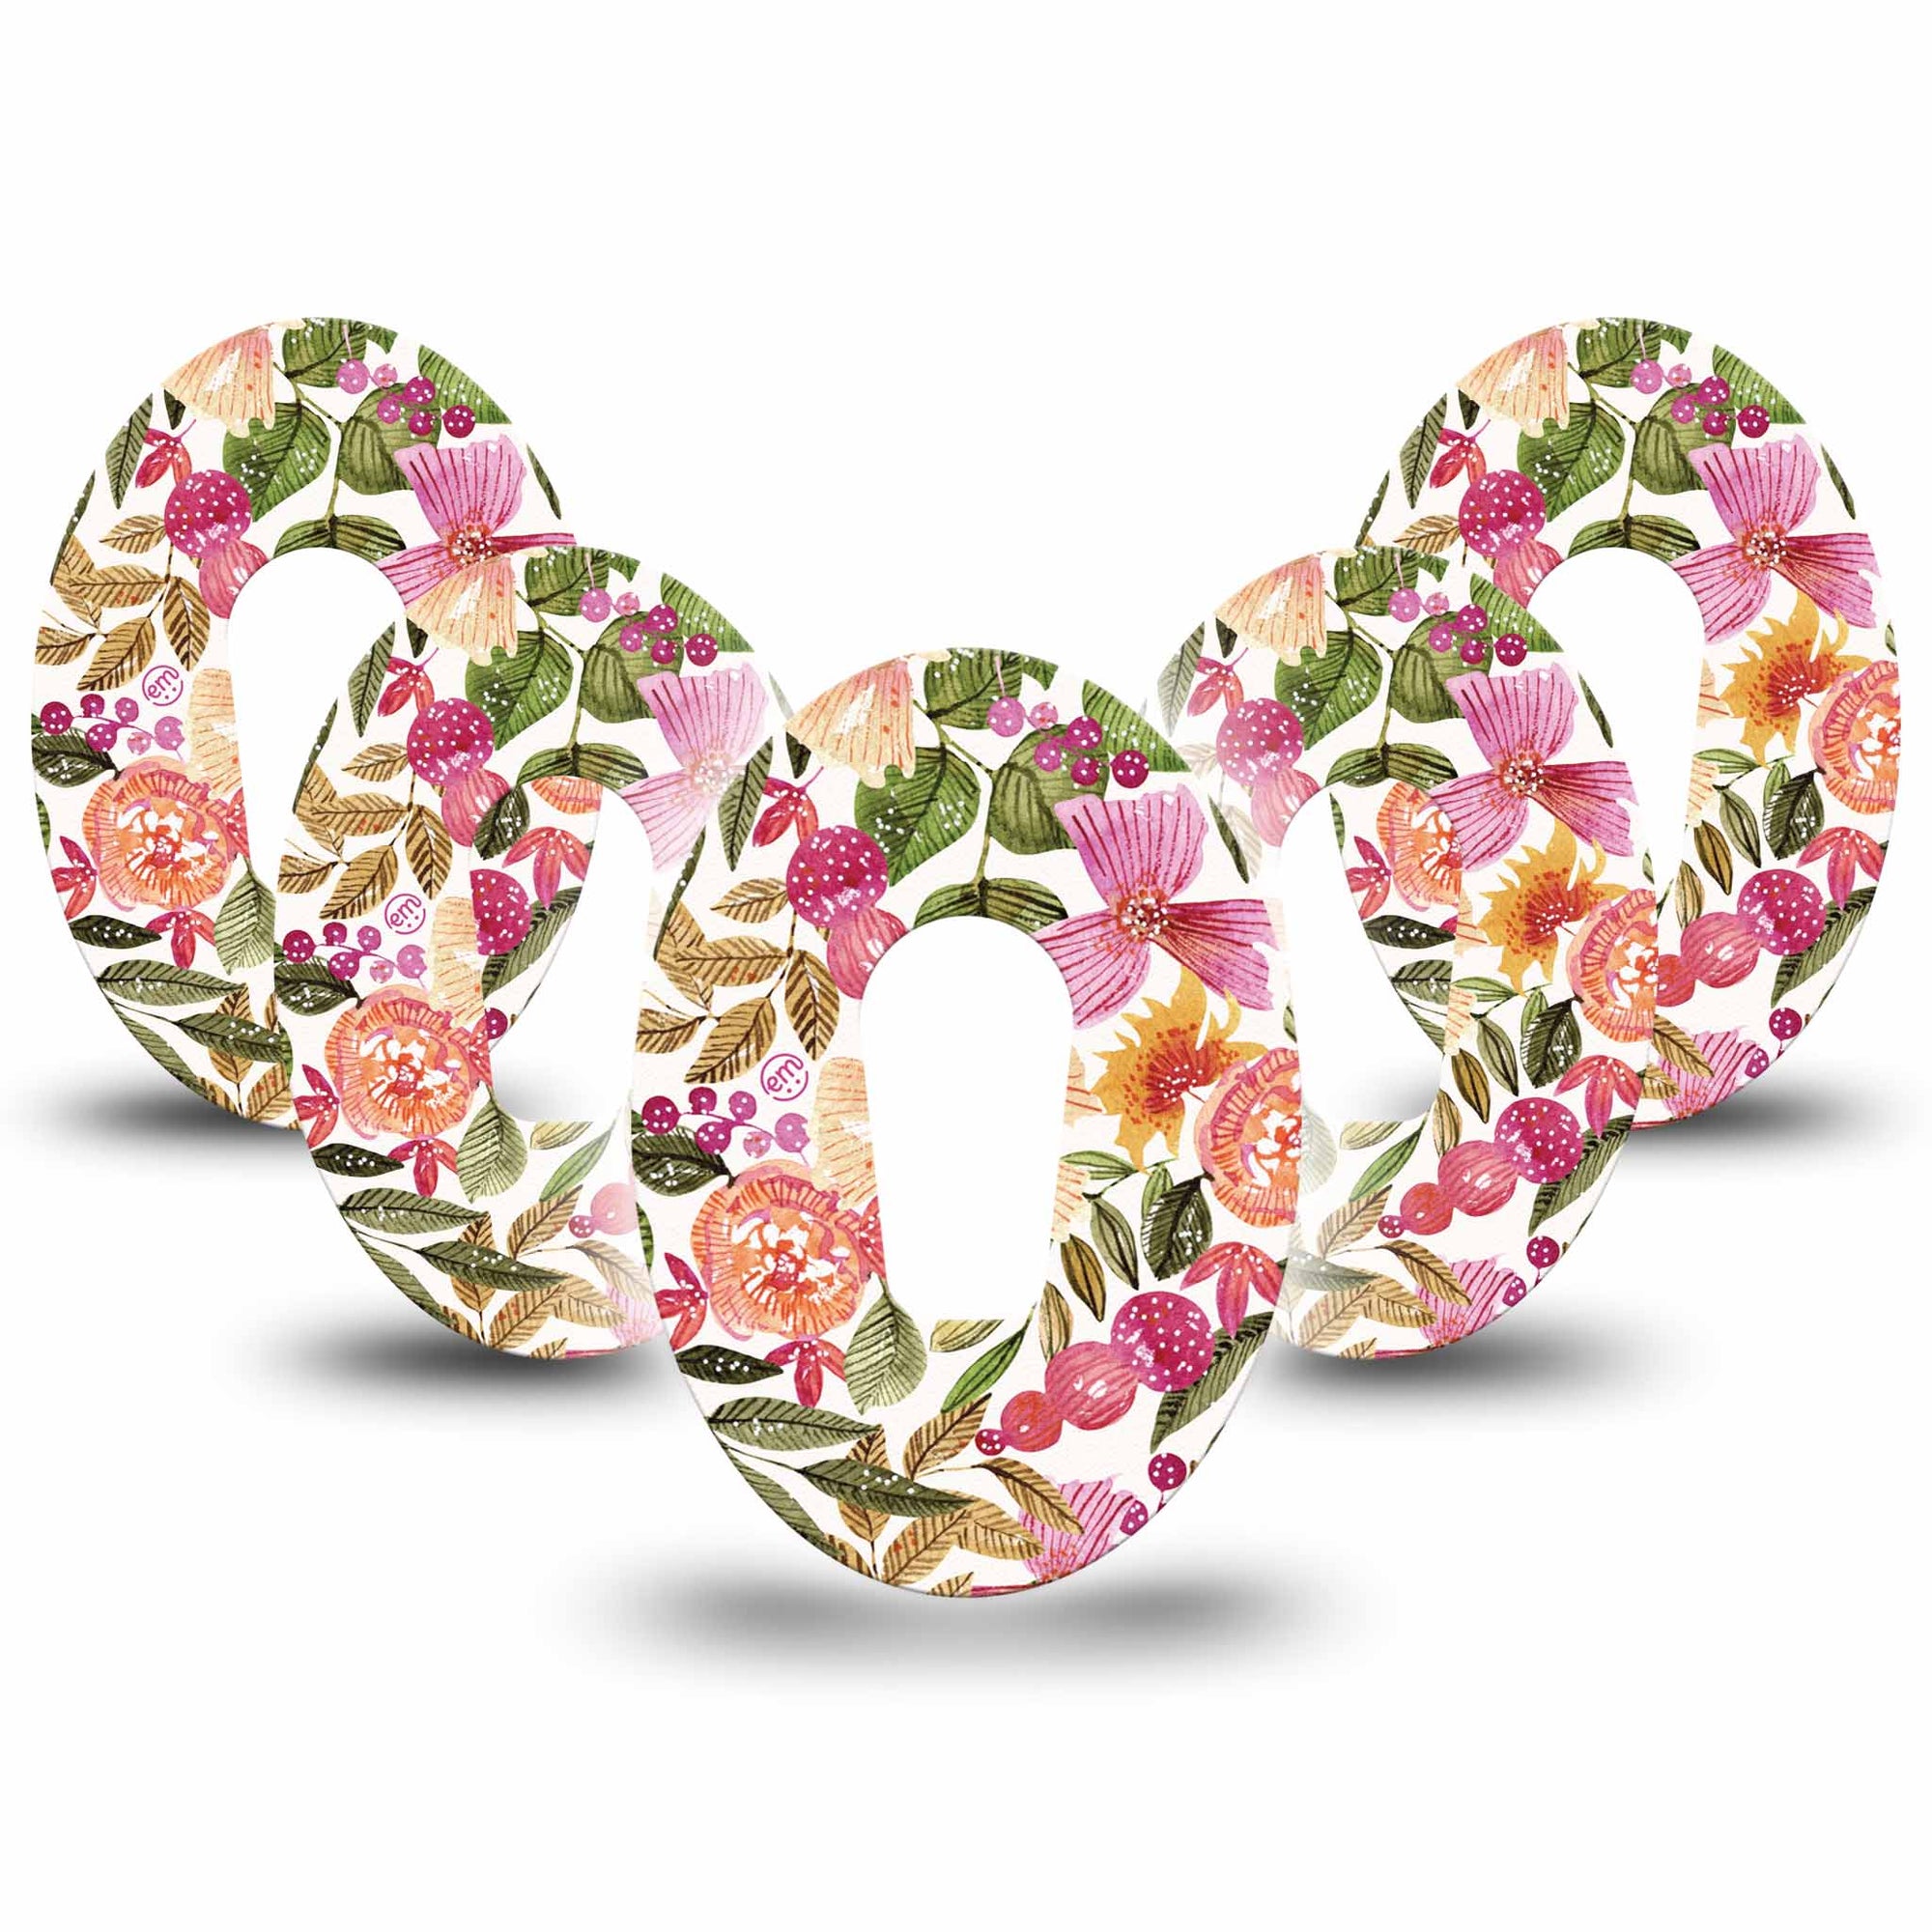 Spring Bouquet Dexcom G6 Tape, 5-Pack, Eastertide Florals Inspired, CGM Plaster Patch Design